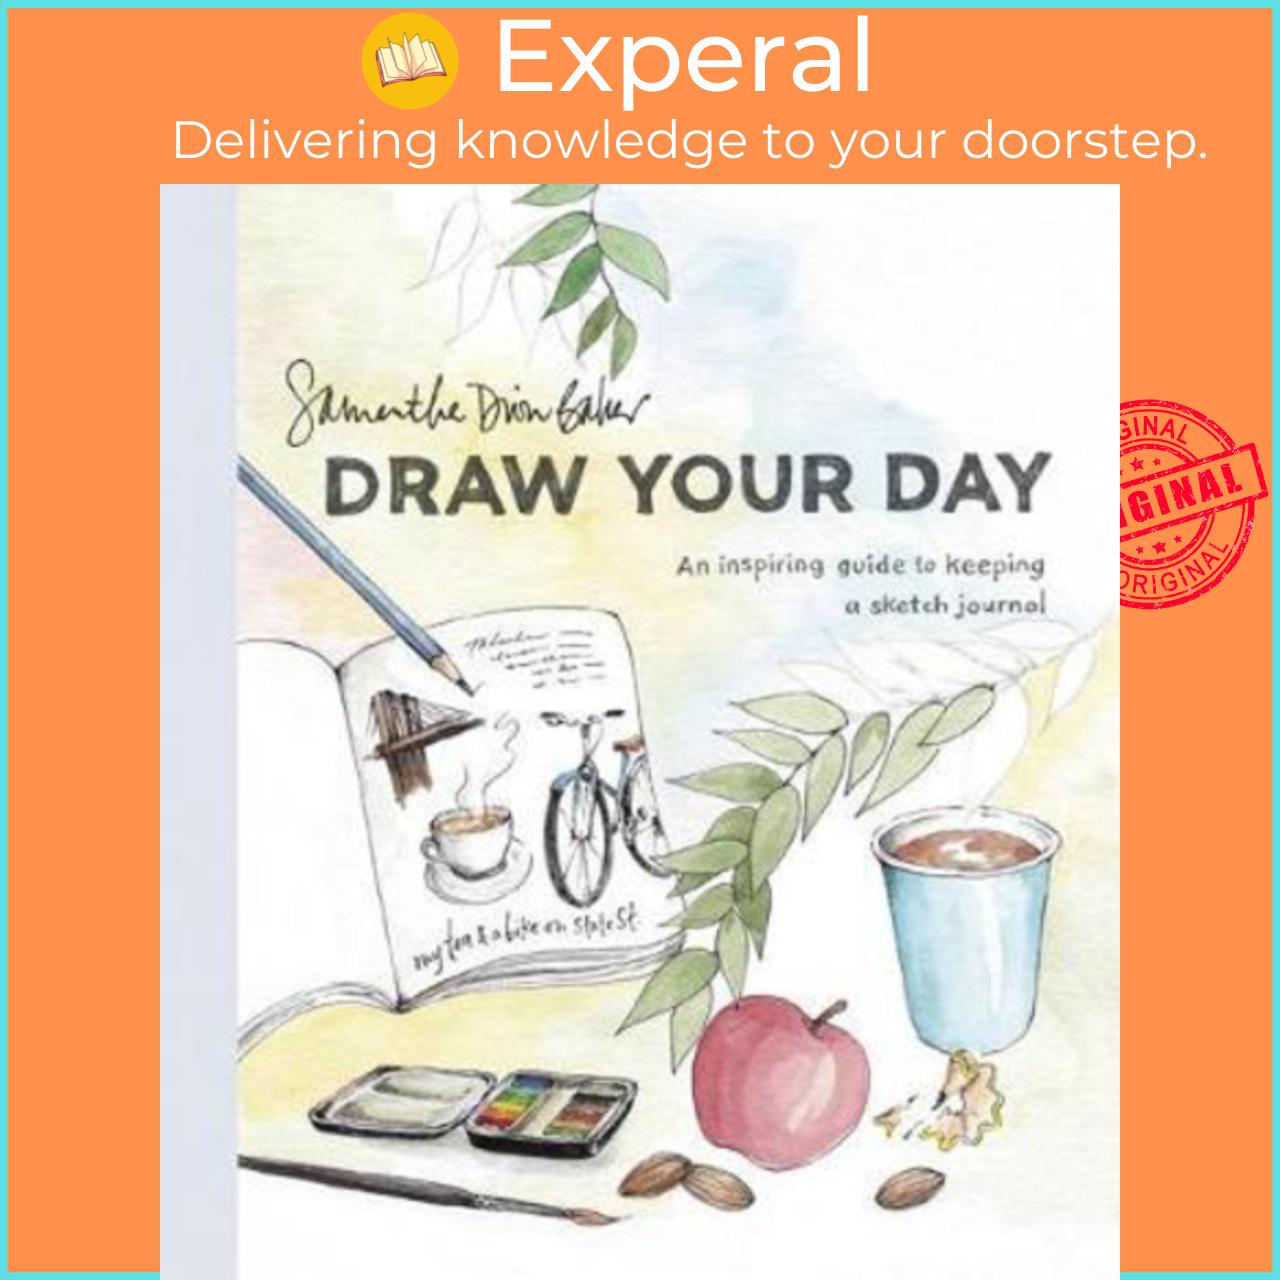 Sách - Draw Your Day : An Inspiring Guide to Keeping a Sketch Journal by Samantha Dion Baker (US edition, paperback)